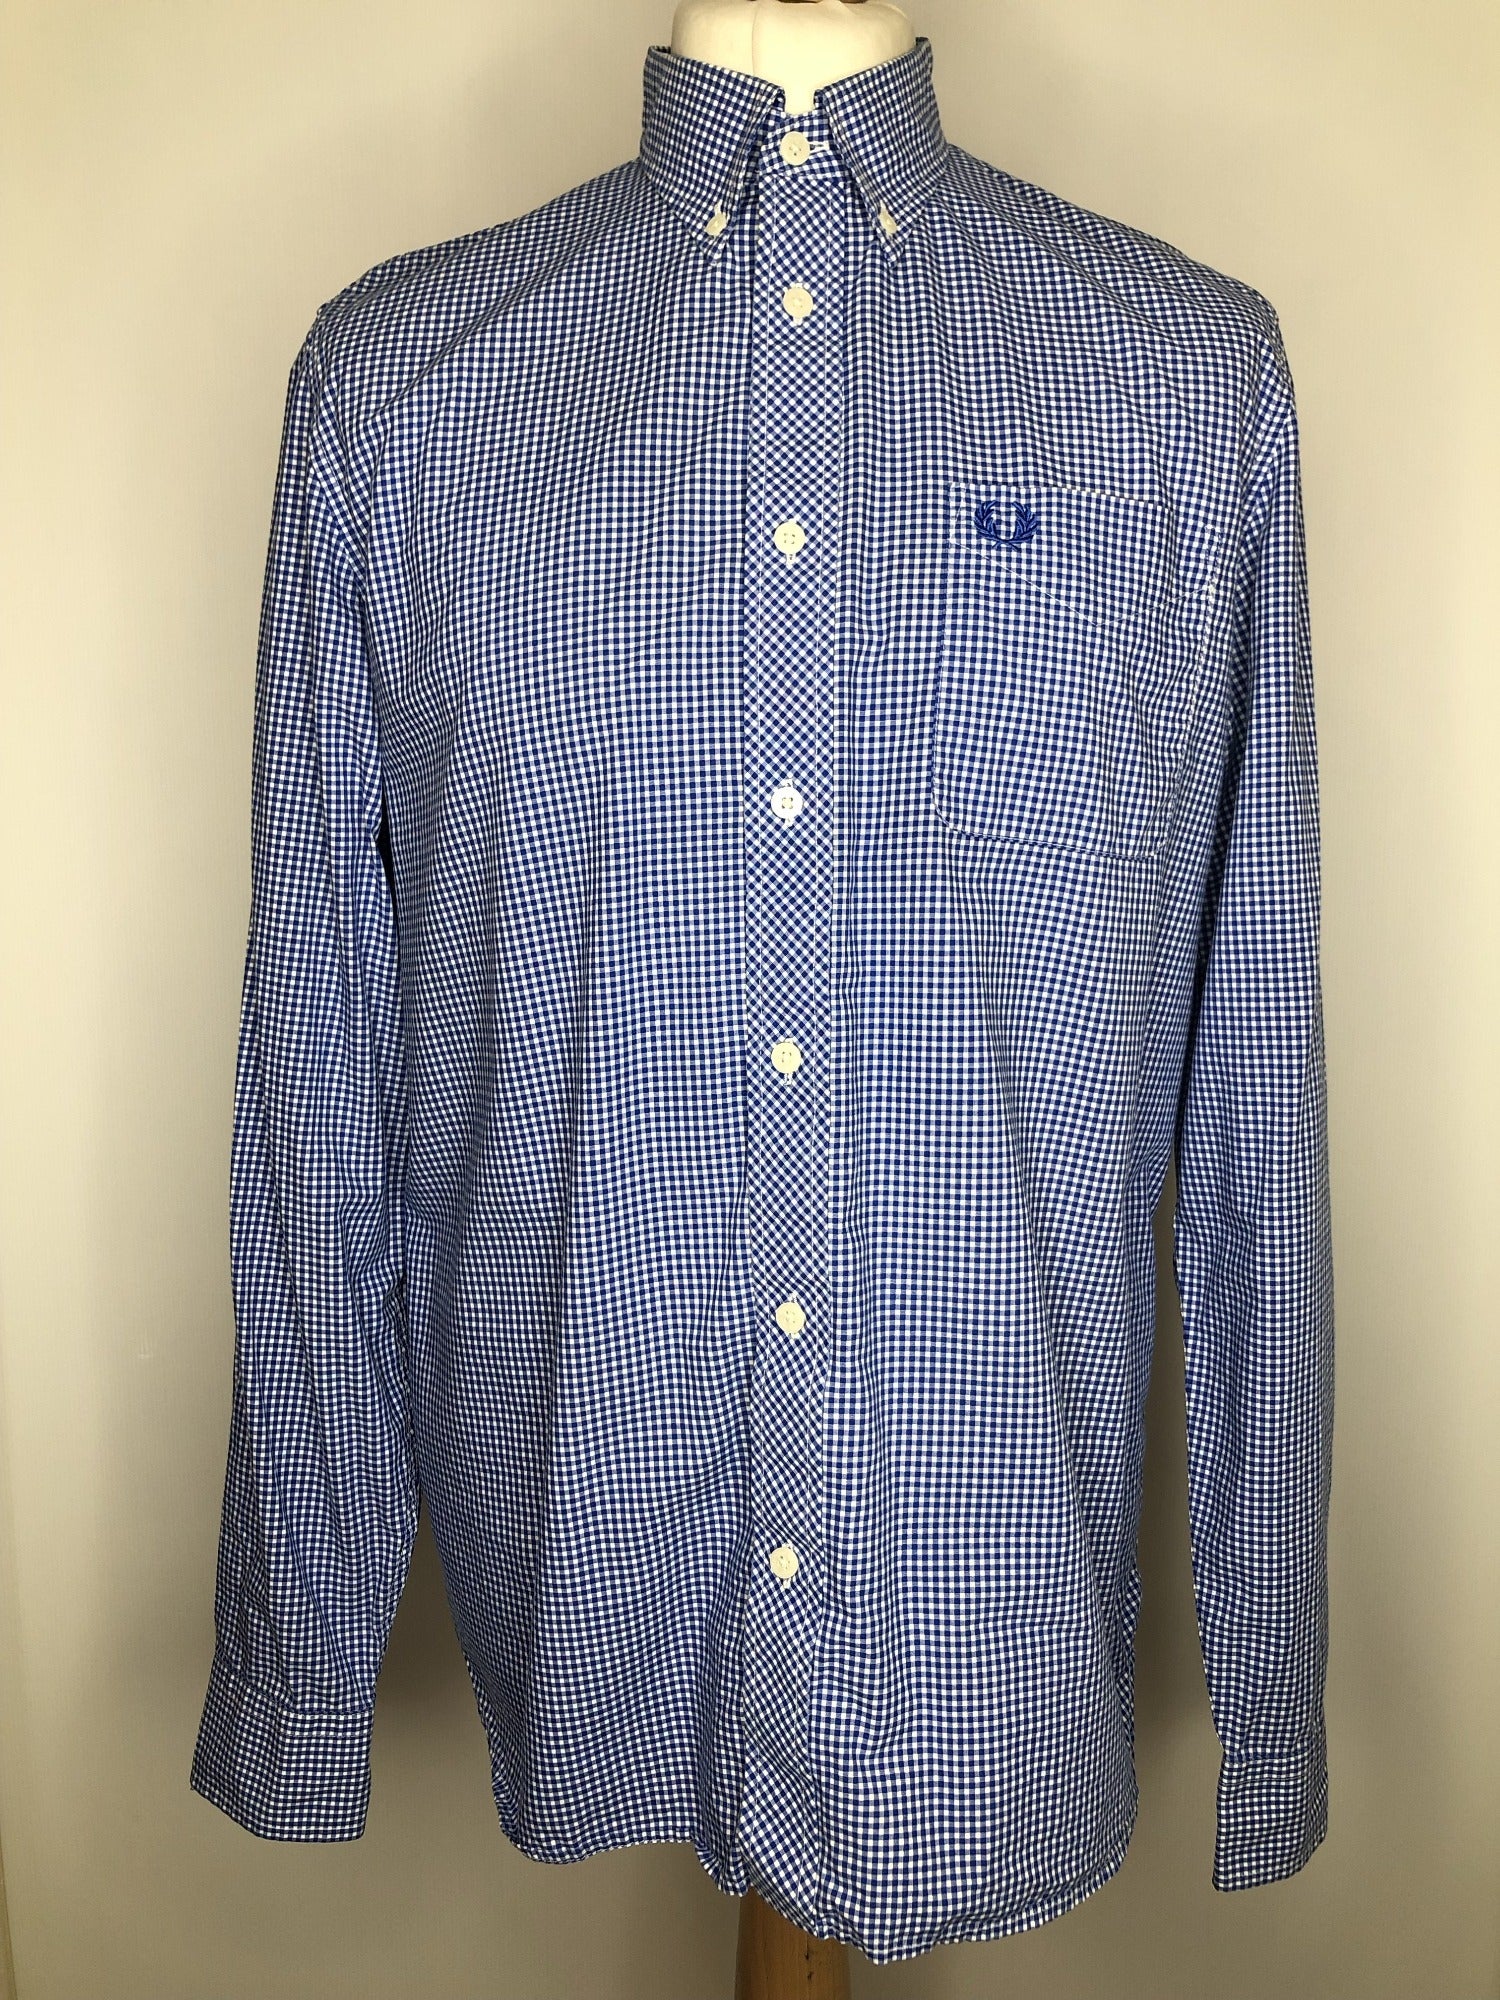 vintage  Urban Village Vintage  Shirt  retro  MOD  mens  long sleeves  Long sleeved top  long sleeve  L  gingham print  gingham check  Gingham  Fred Perry  fred  embroidered logo  Embroidered  collar  button down collar  button down  blue